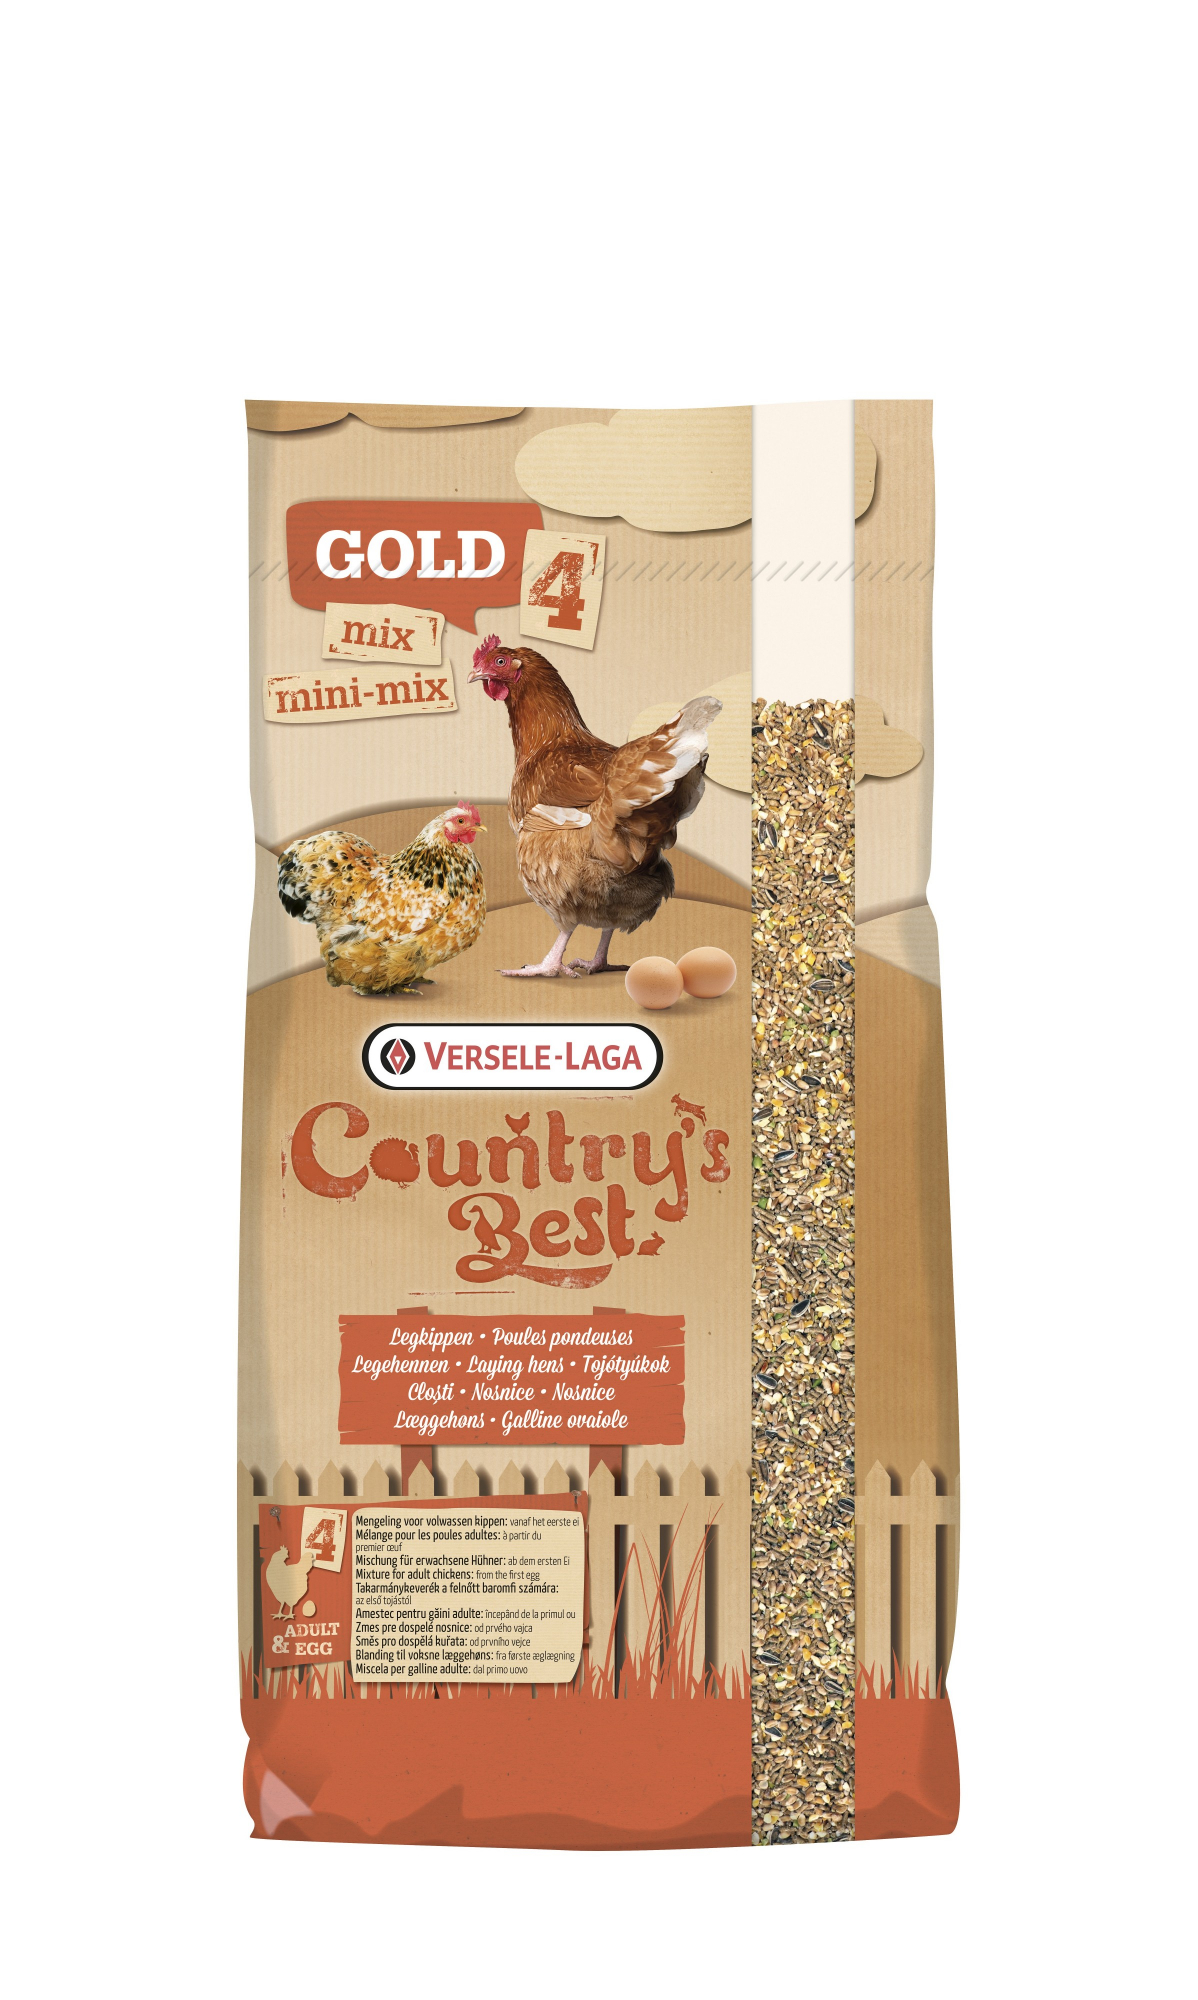 Gold 4 Mix Country's Best Alimento completo para gallinas ponedoras